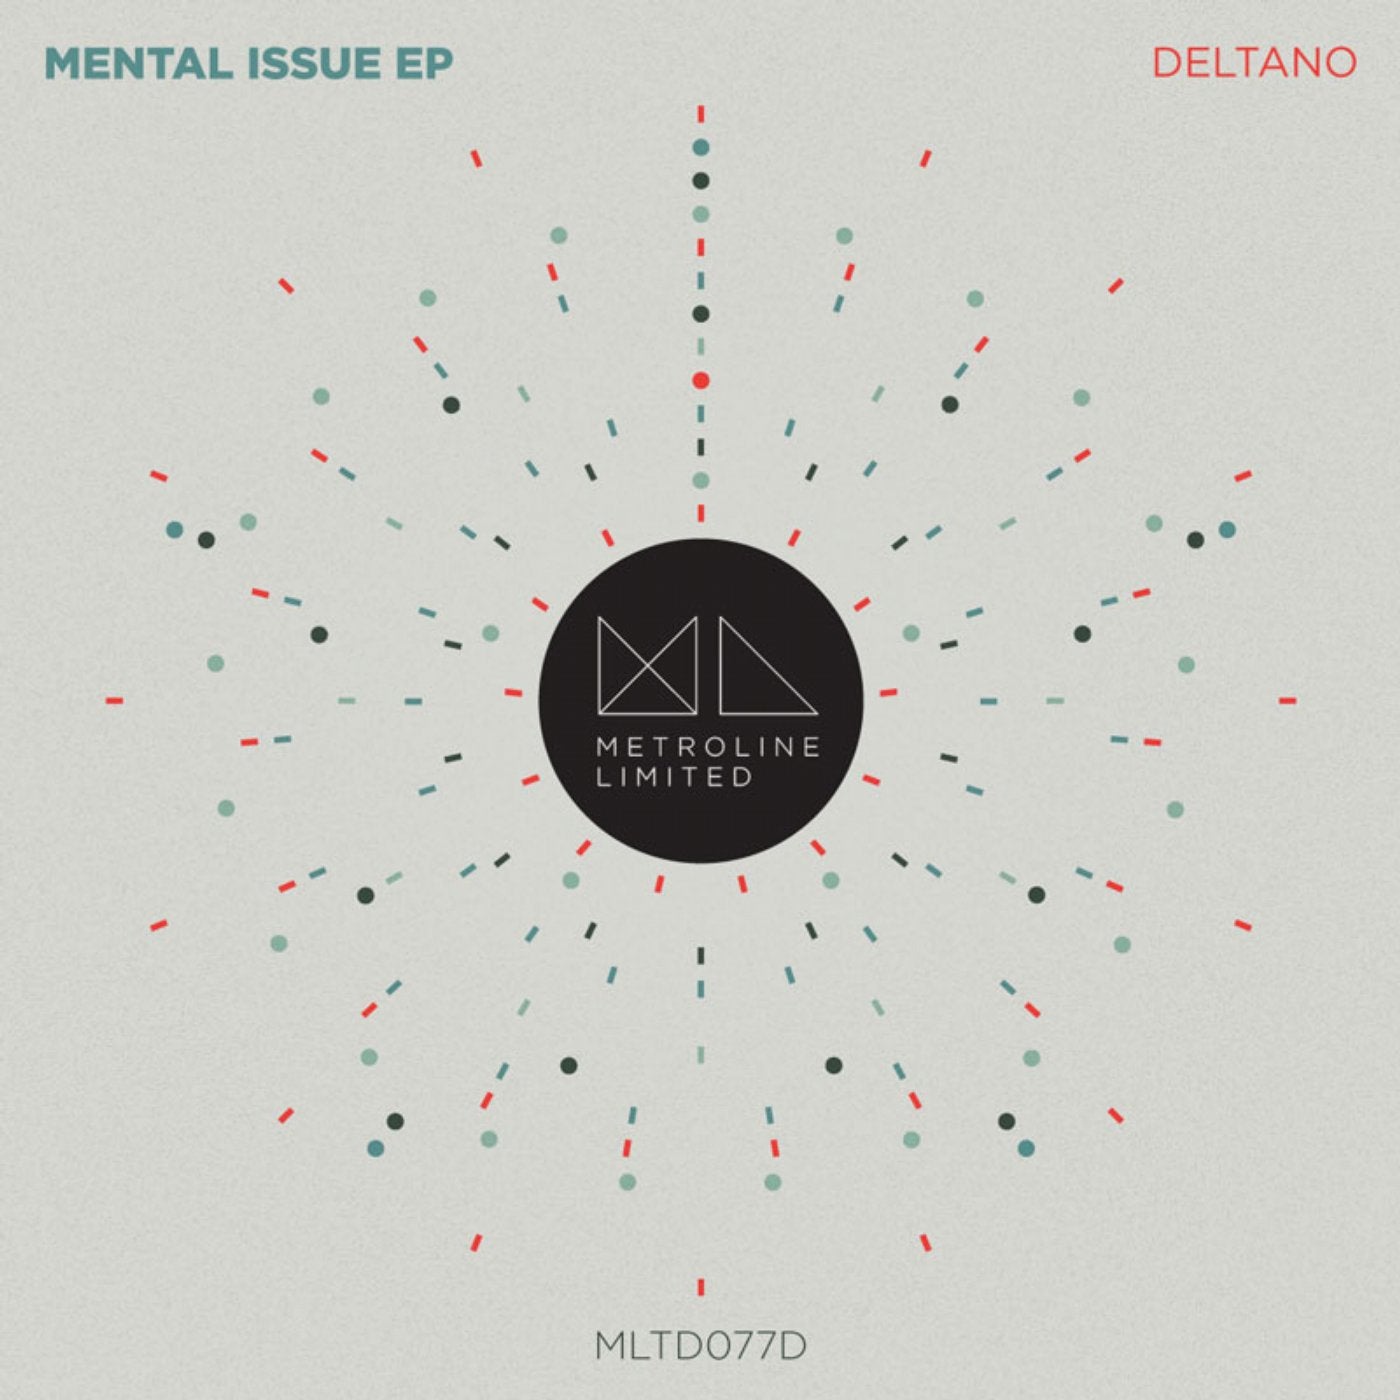 Mental Issue EP